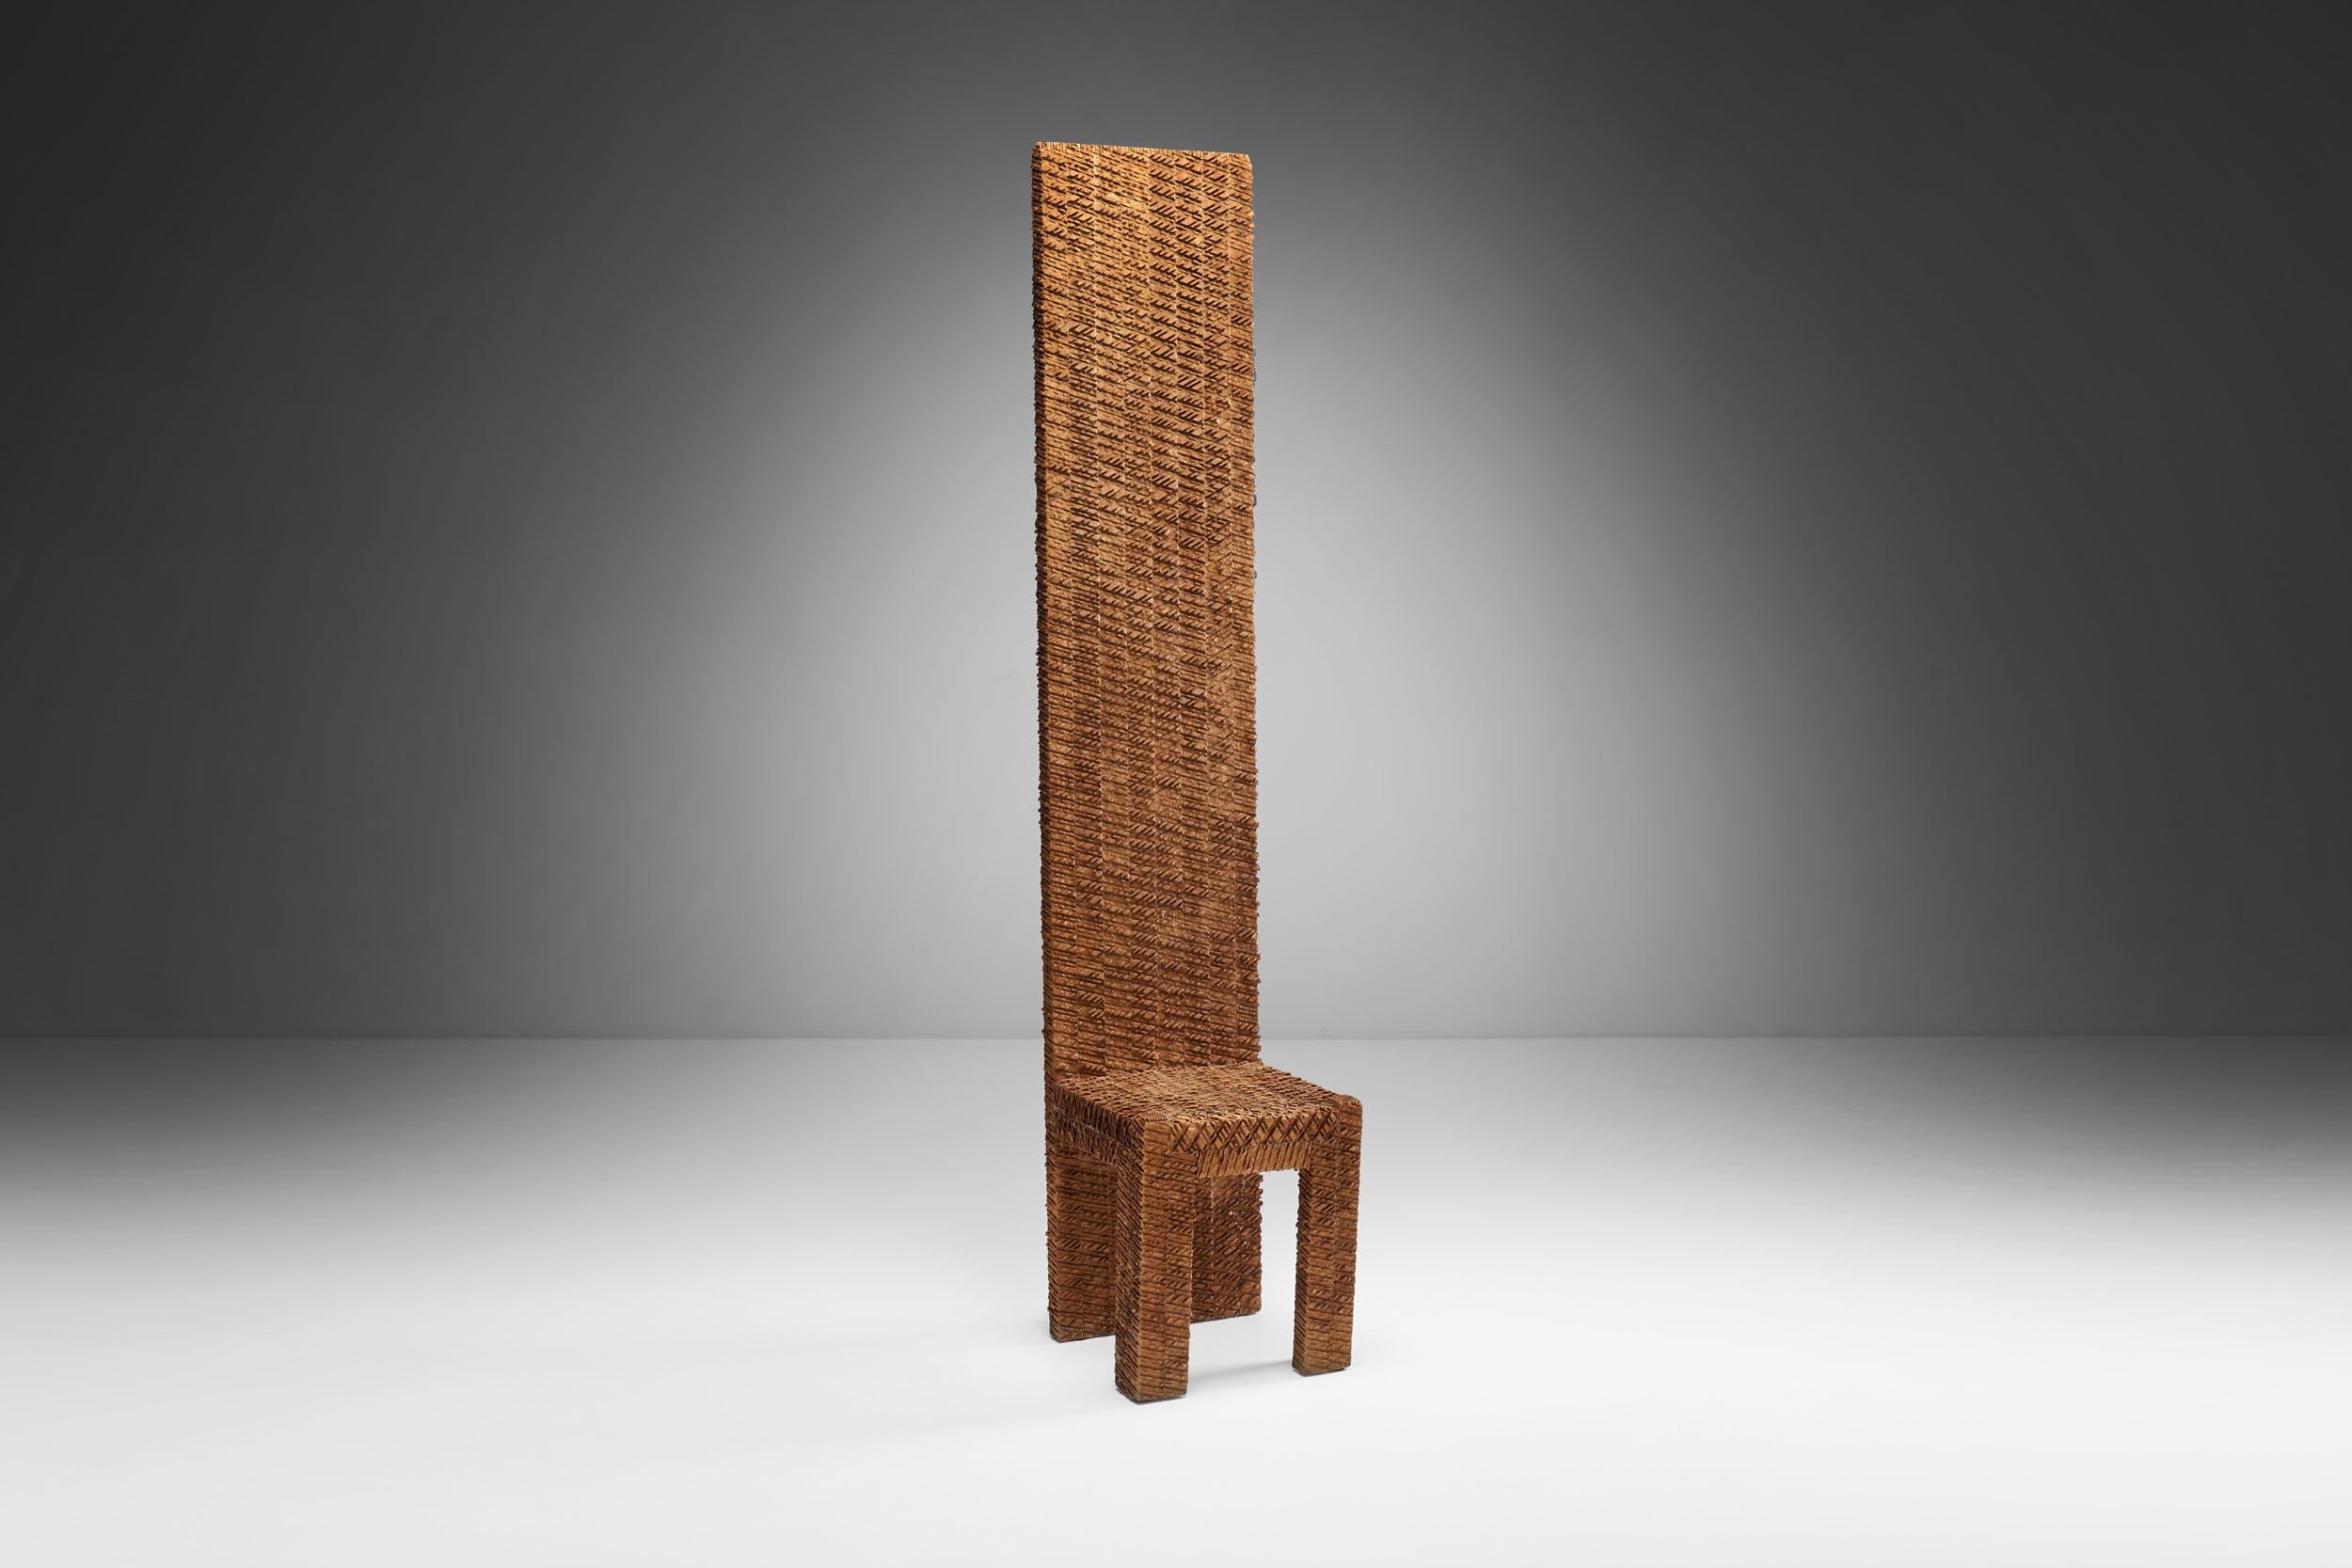 In Urano Palma’s designs it is often hard to separate sculpture from furniture. The artistic avant-garde movements have evidently left a mark on the Italian designer’s present high-back chair. The present work, while looking like a chair, falls in